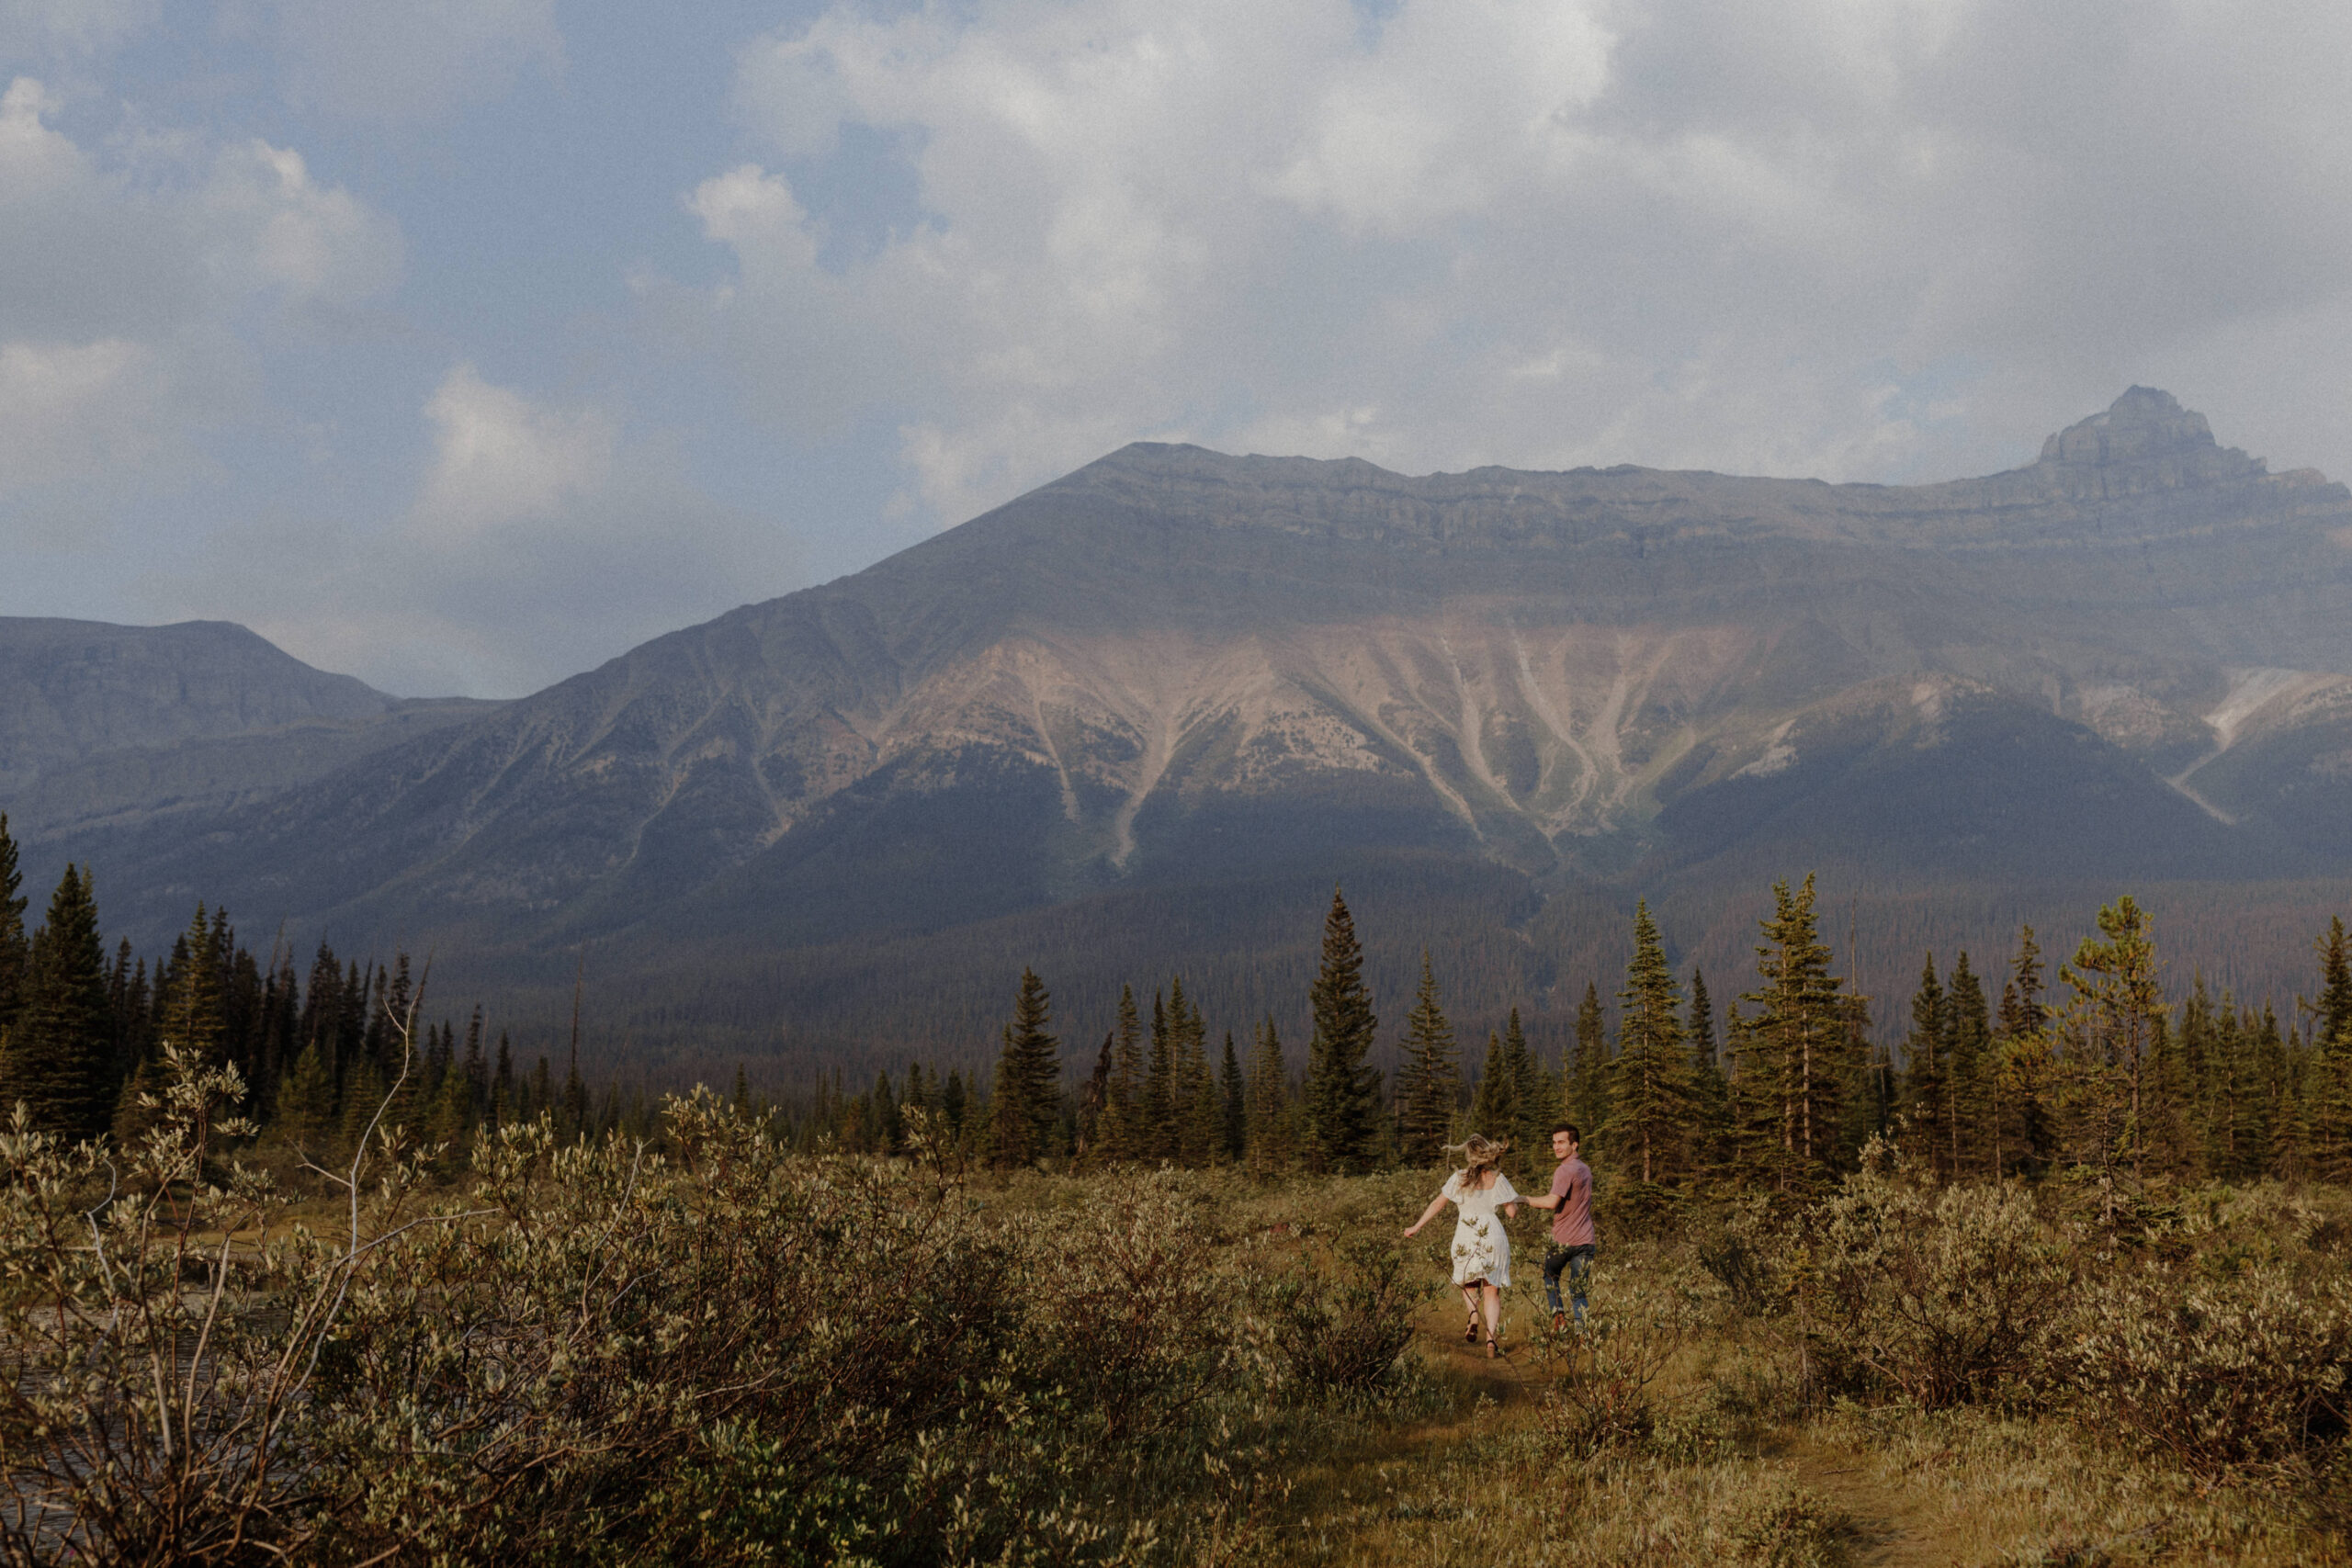 Two people walking through a field with mountains in the background in the rocky mountains in banff alberta.